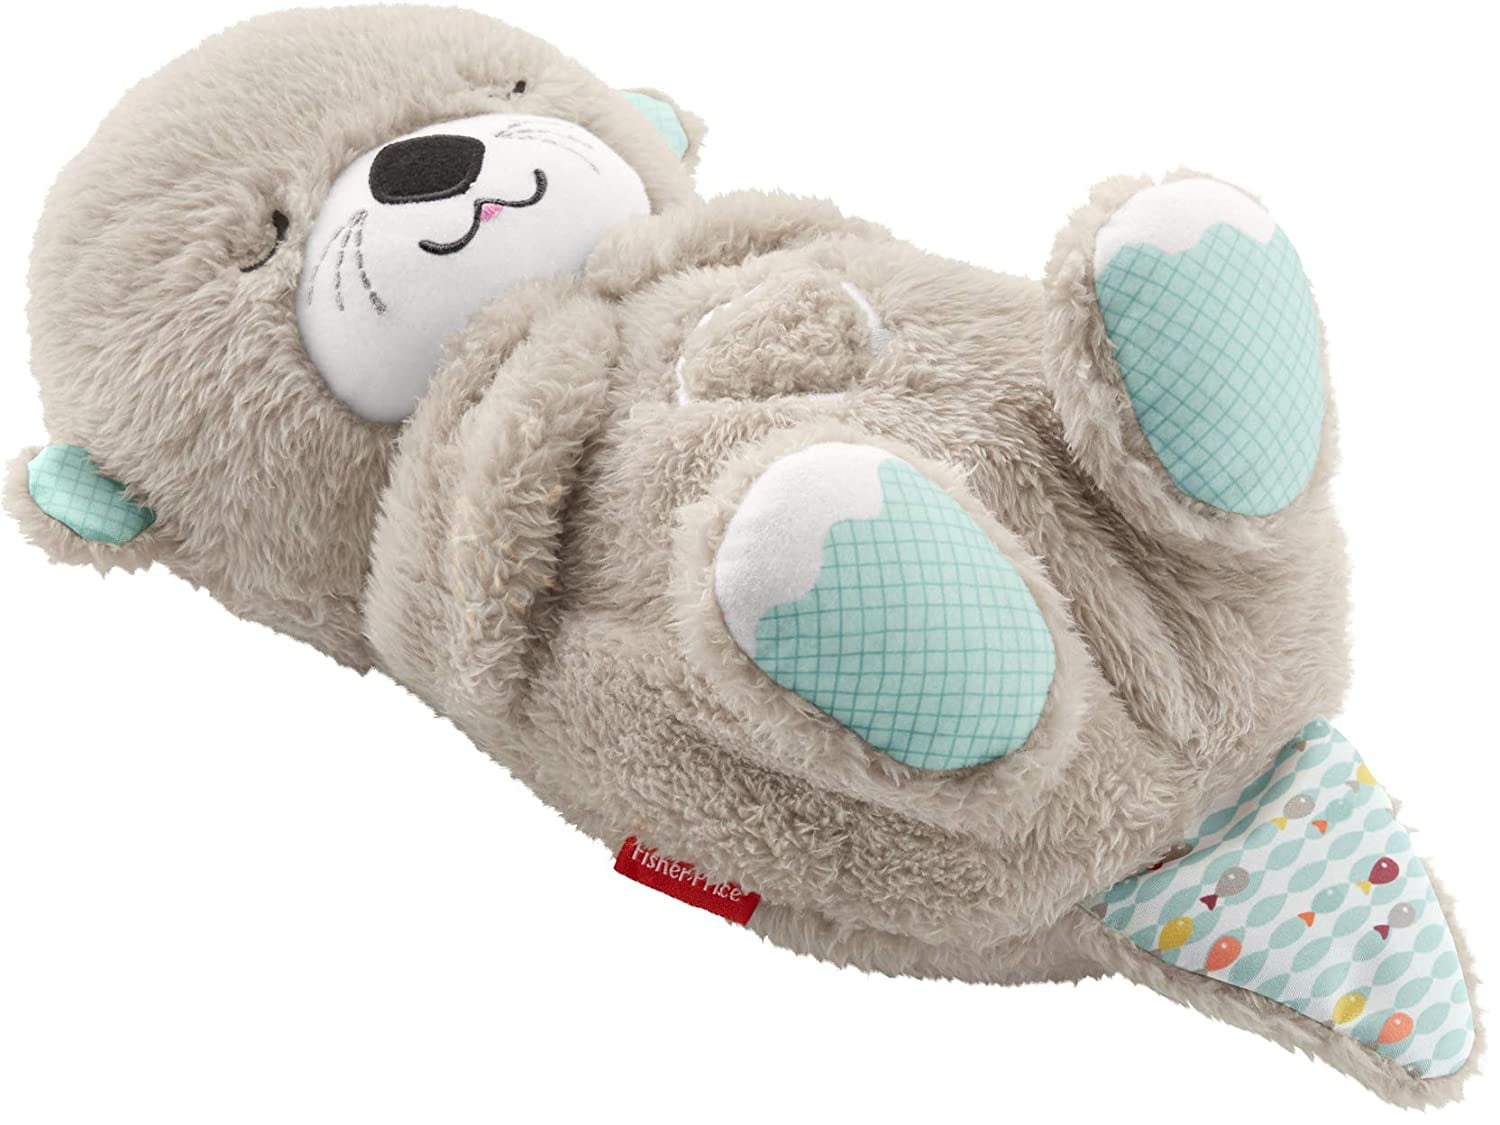 Sound & Motion Fisher Price Soothe 'n Snuggle Bedtime Otter with Lights 